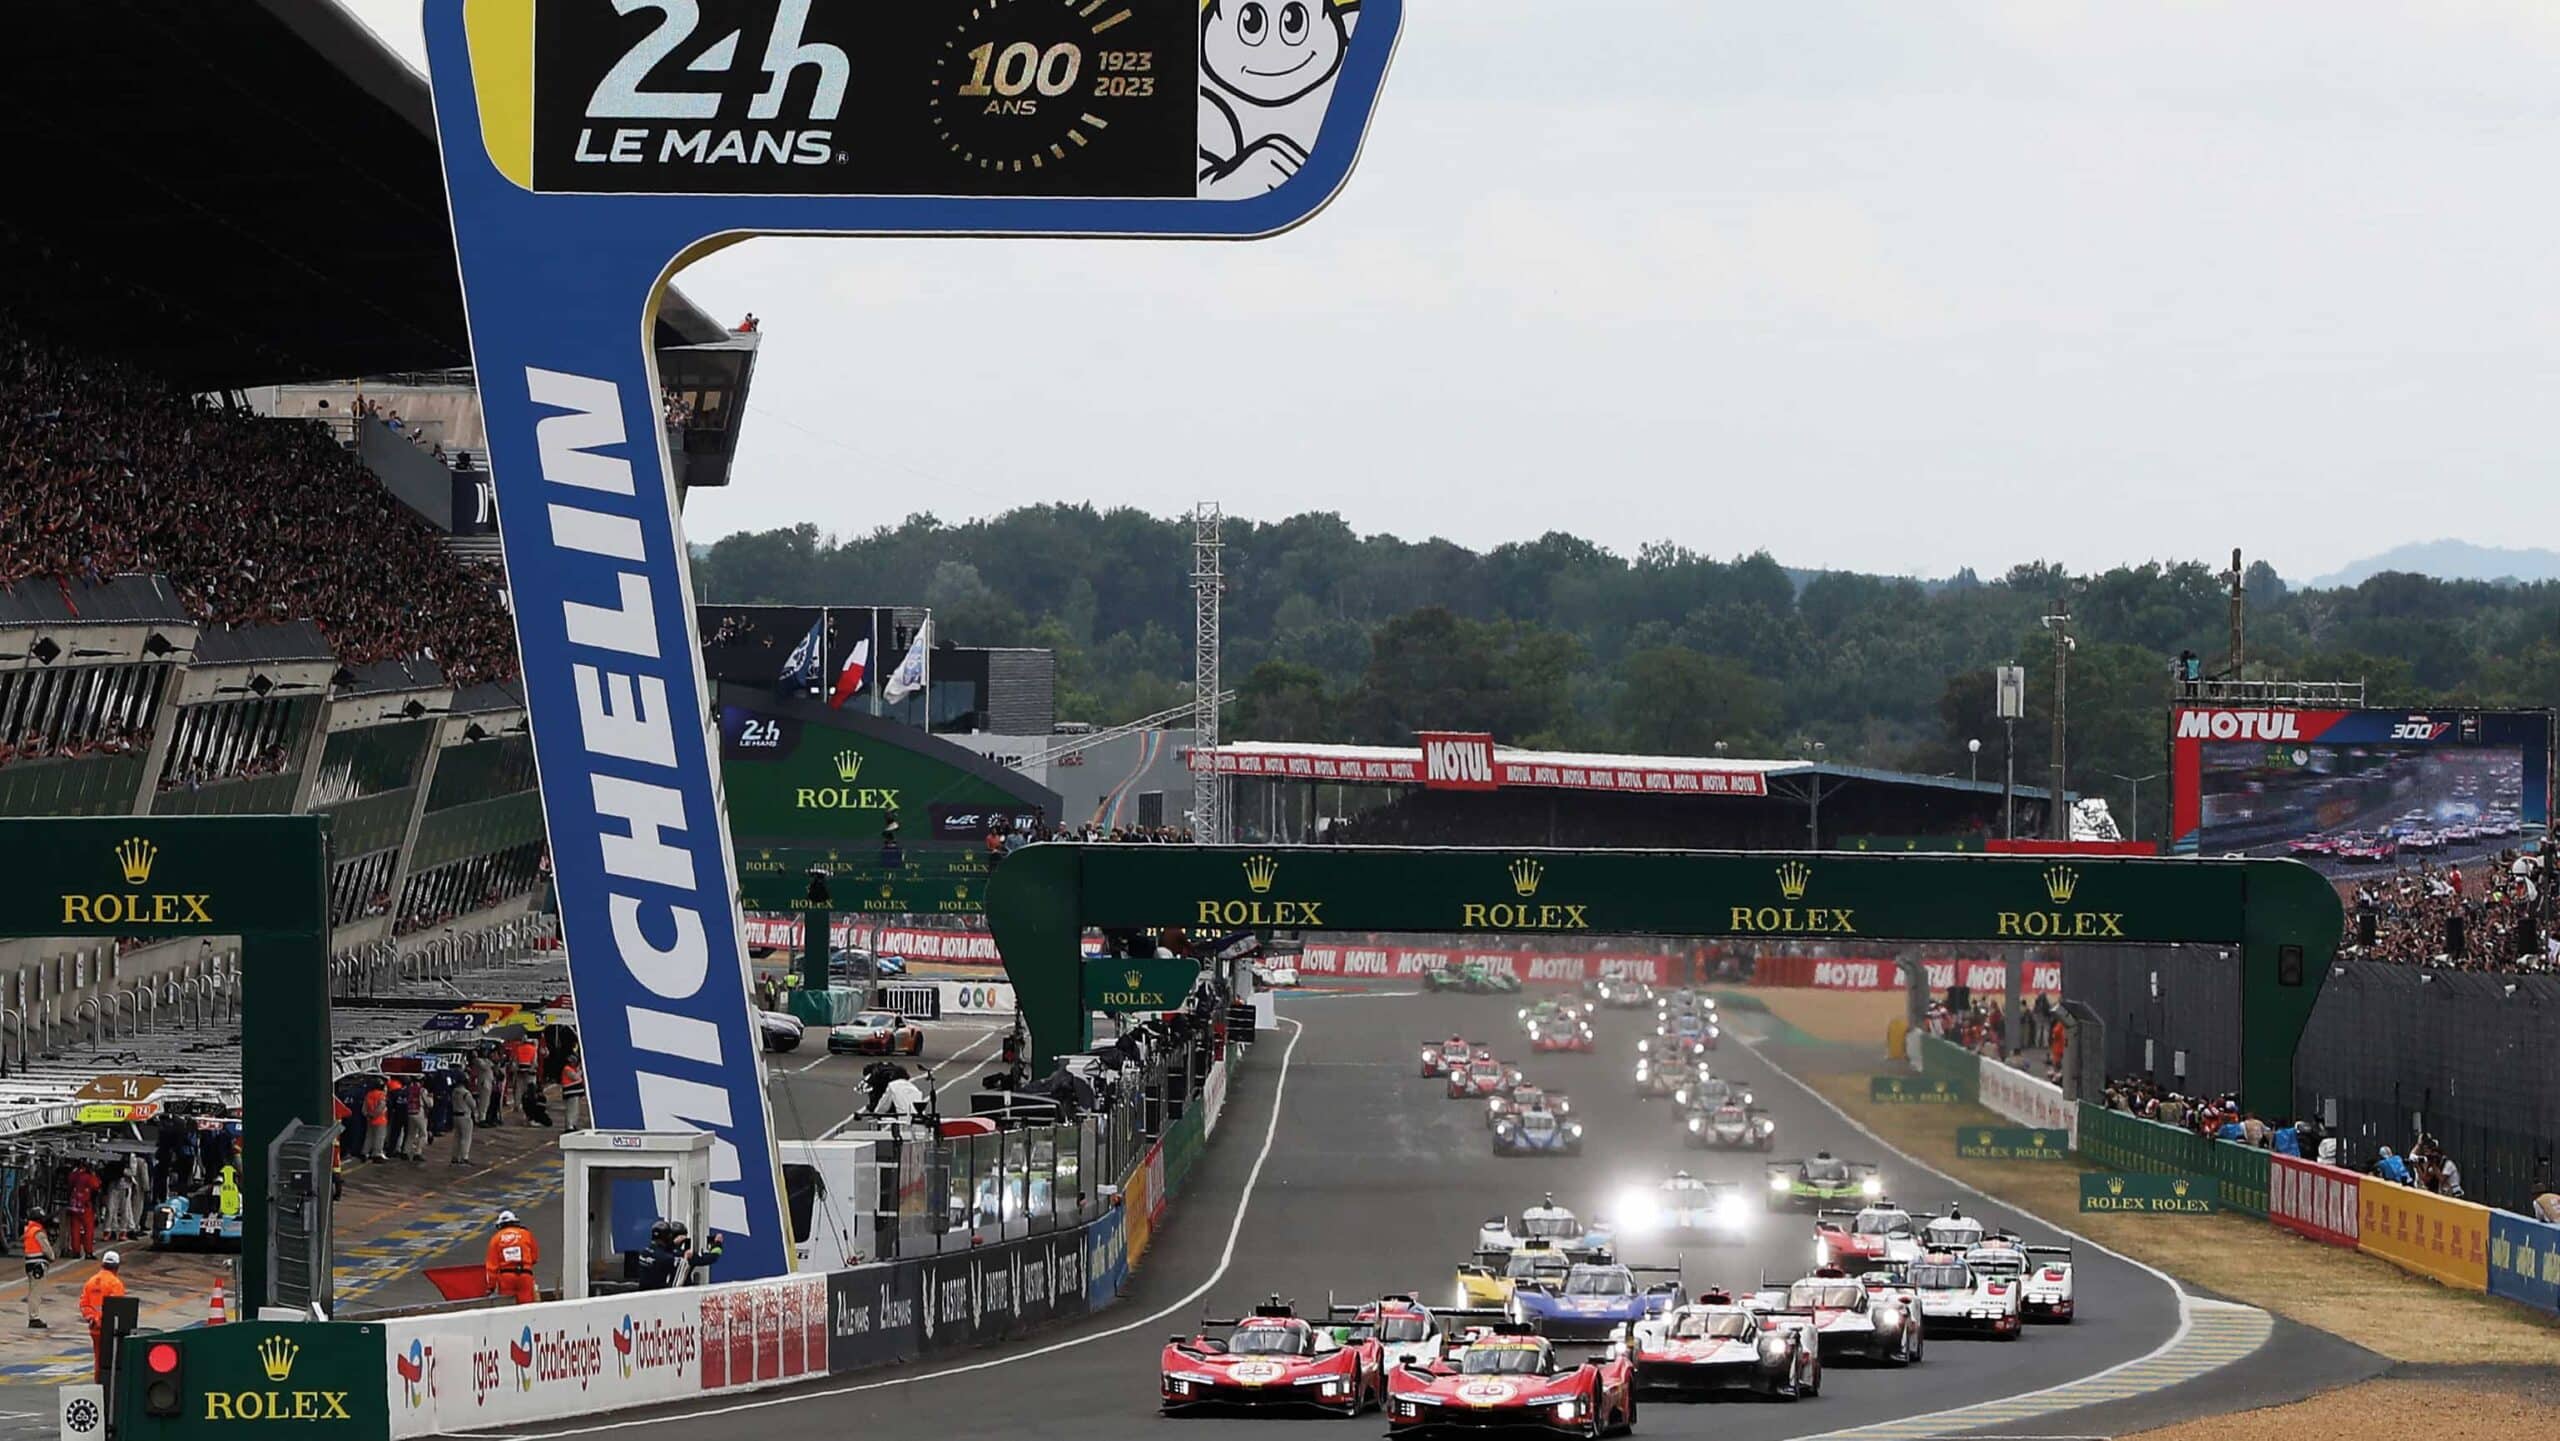 Starting grid for 100th Le Mans Anniversary